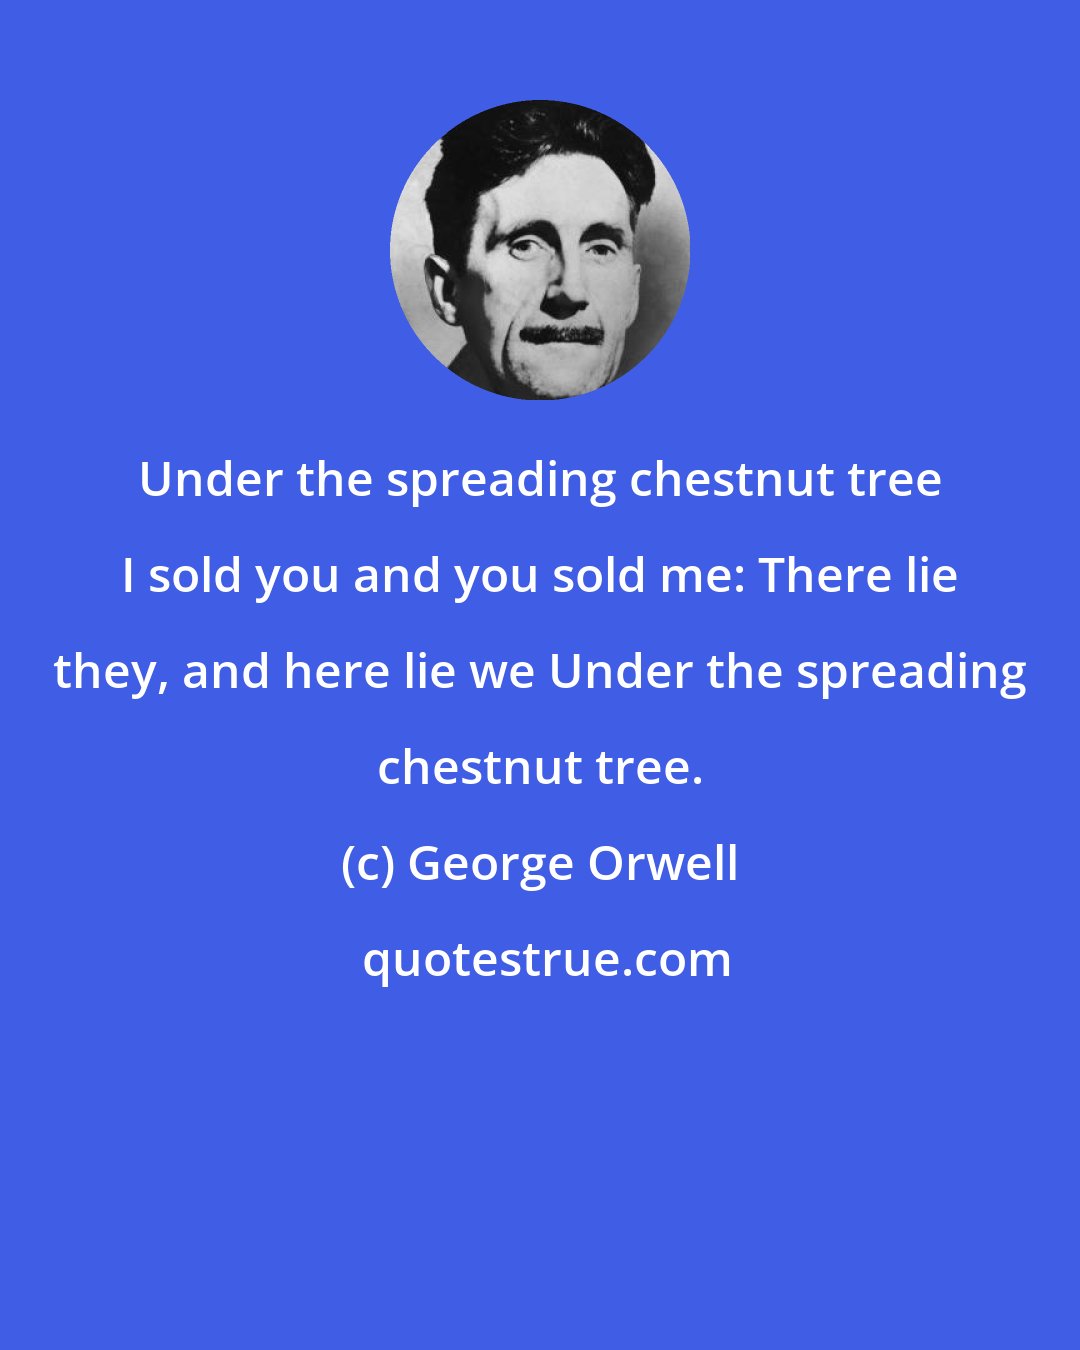 George Orwell: Under the spreading chestnut tree I sold you and you sold me: There lie they, and here lie we Under the spreading chestnut tree.